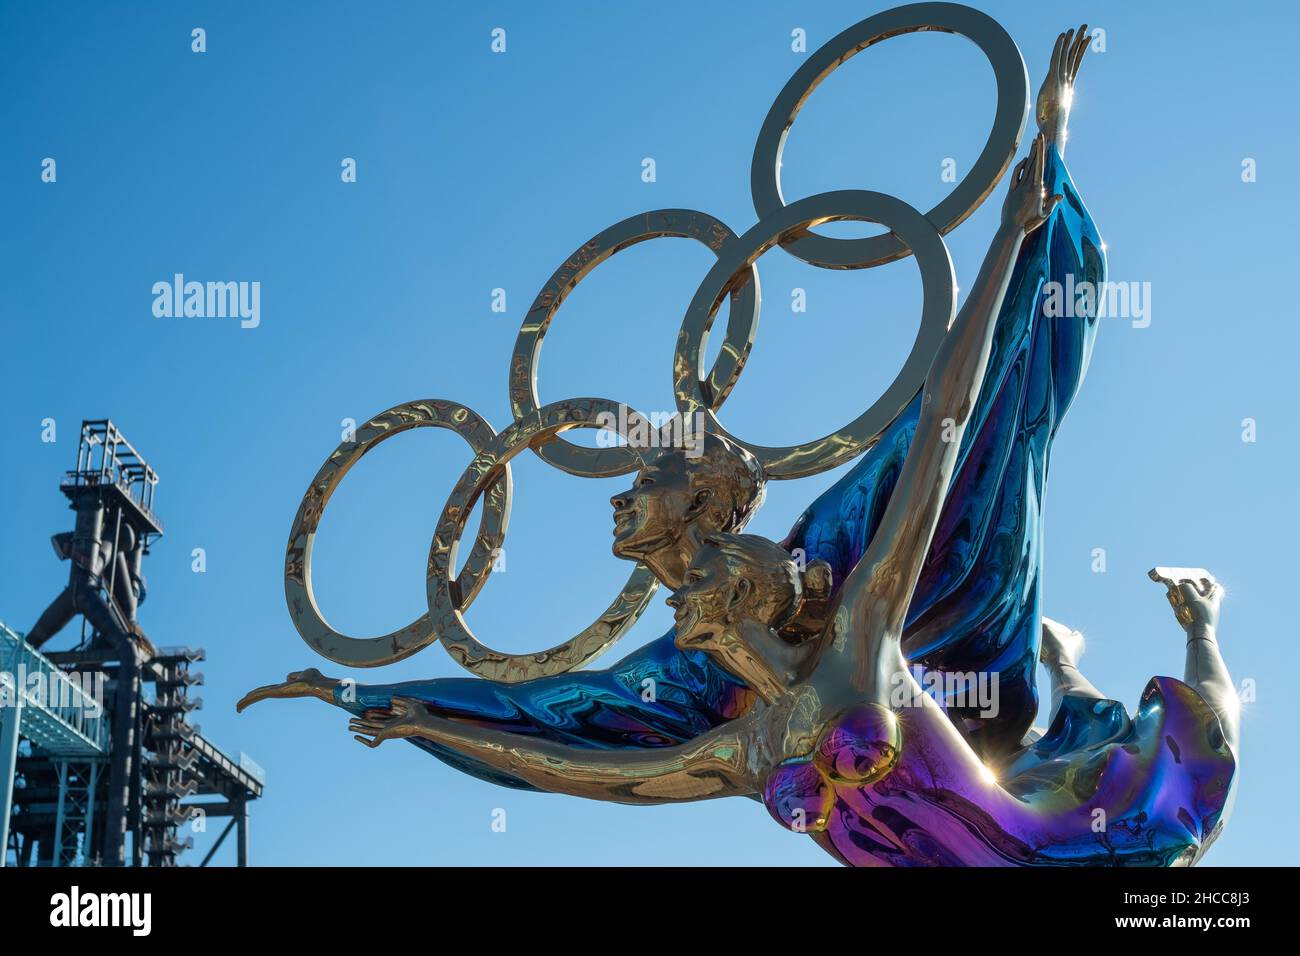 A statue with the Olympic Rings titled 'Dating With the Winter Olympics' in Beijing, China. 26-Dec-2021 Stock Photo